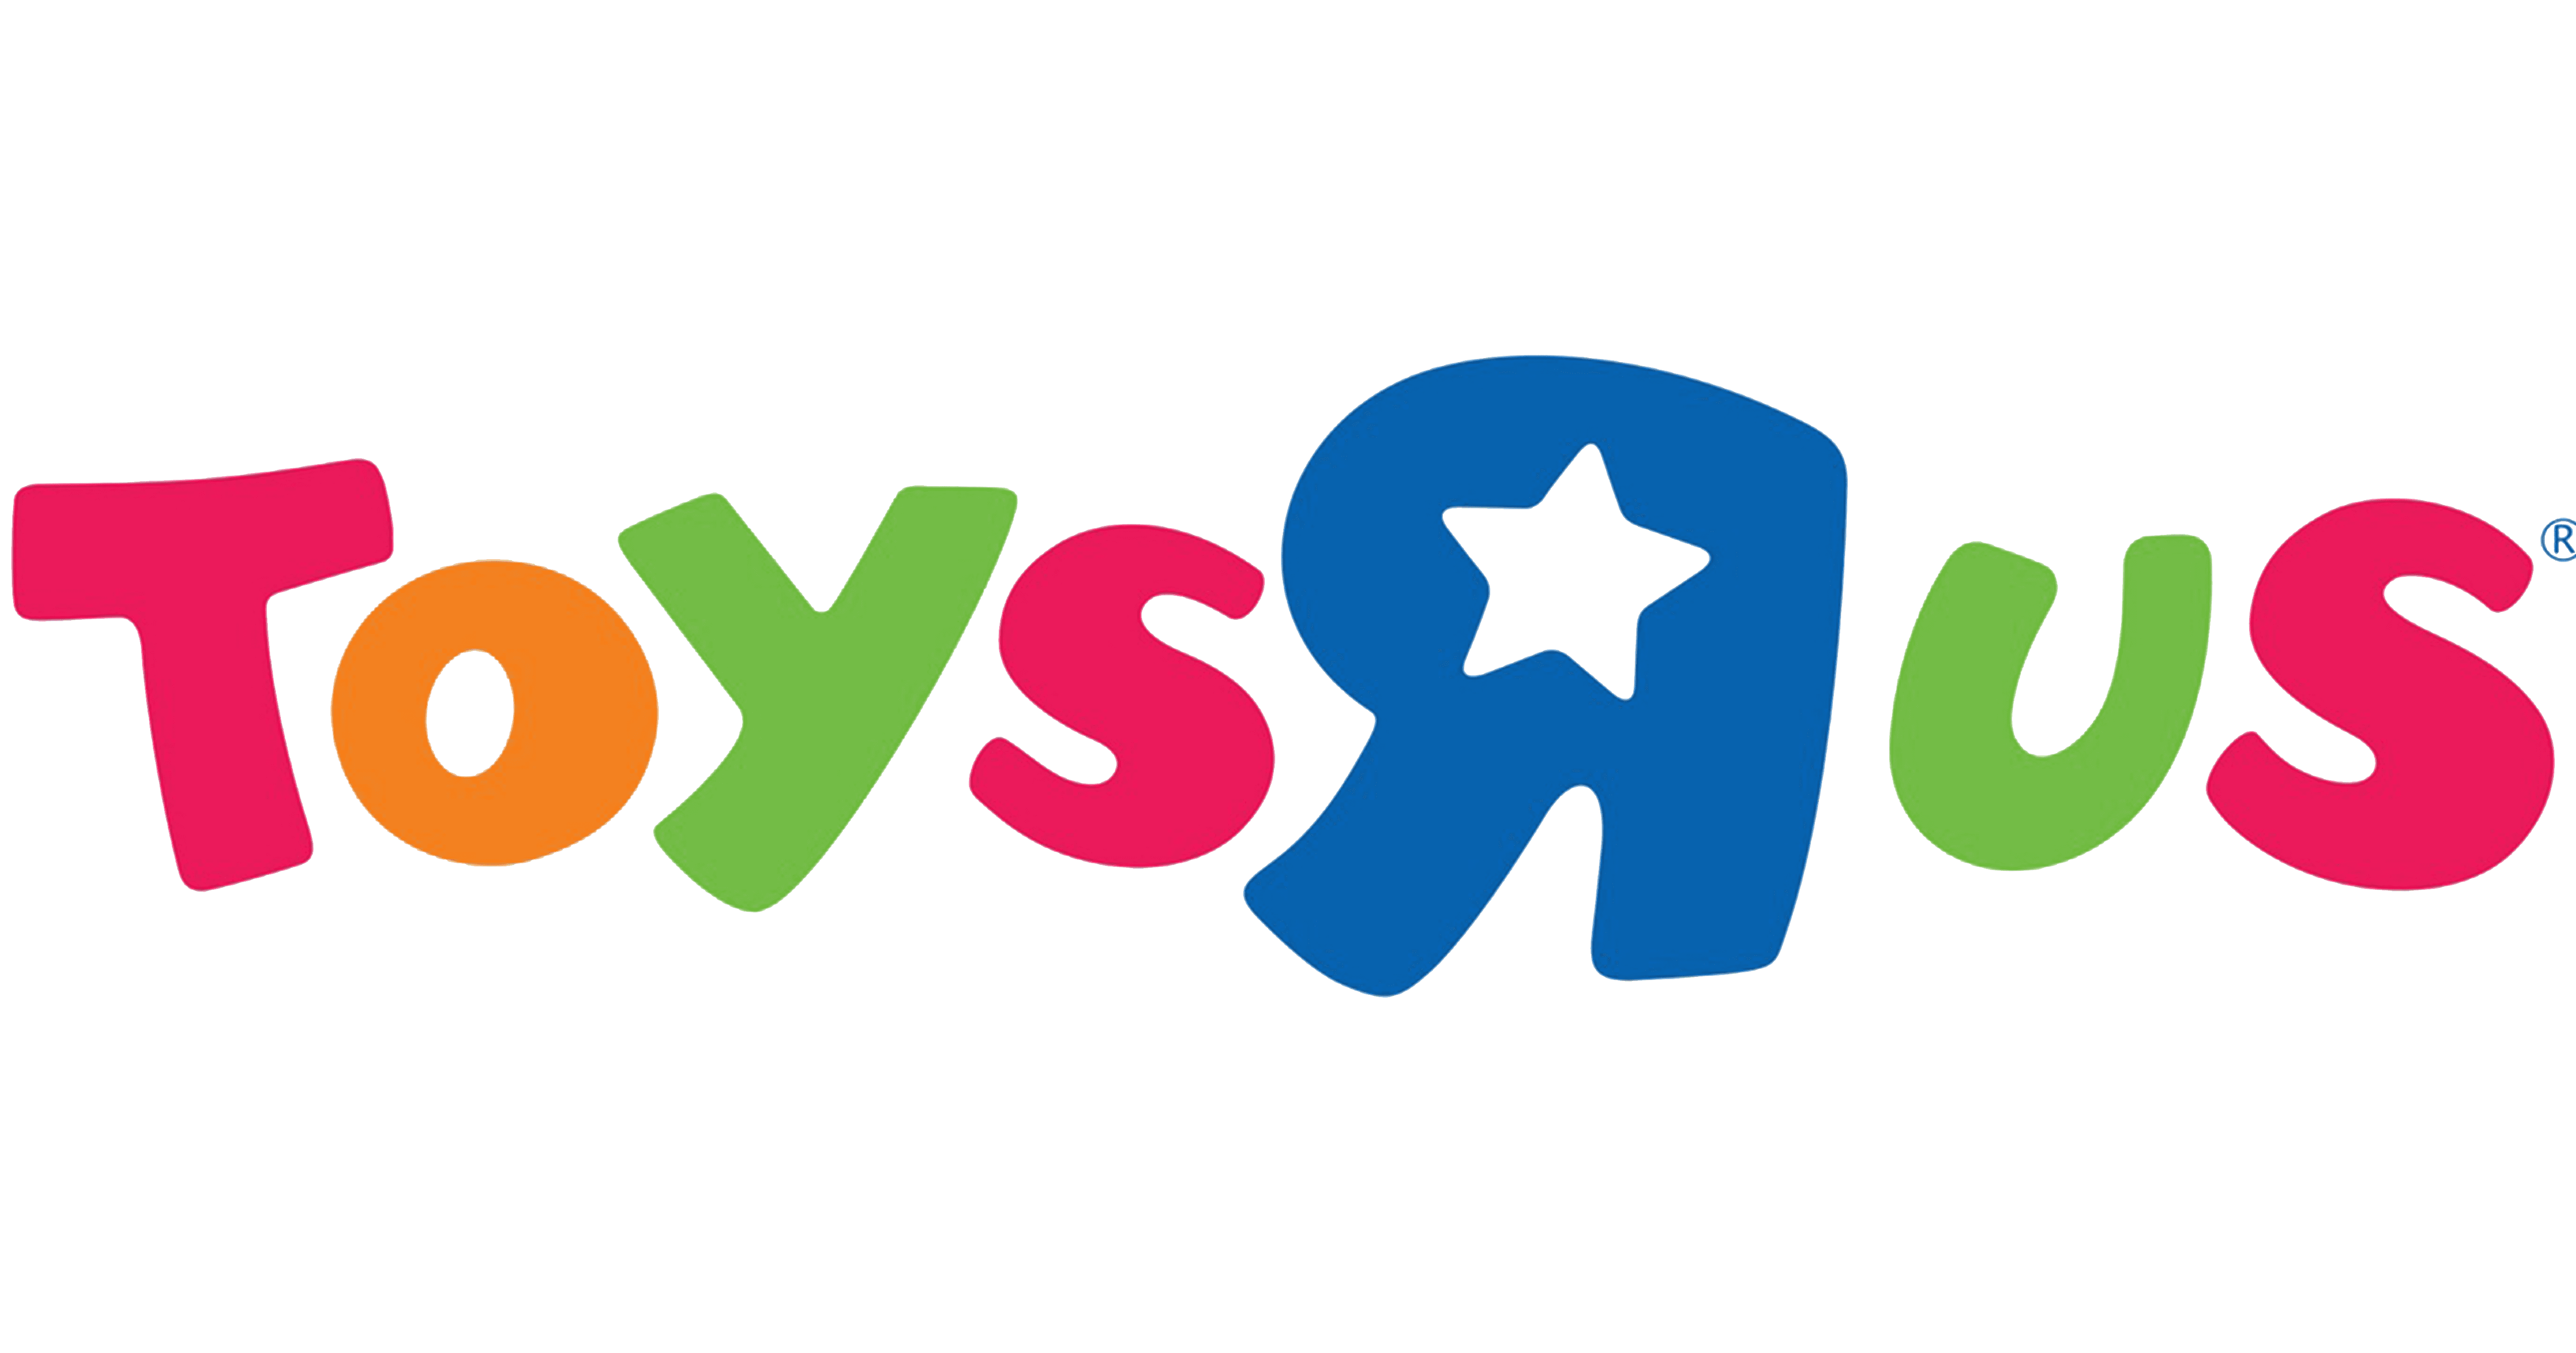 Toys R Us Logo And Symbol Meaning